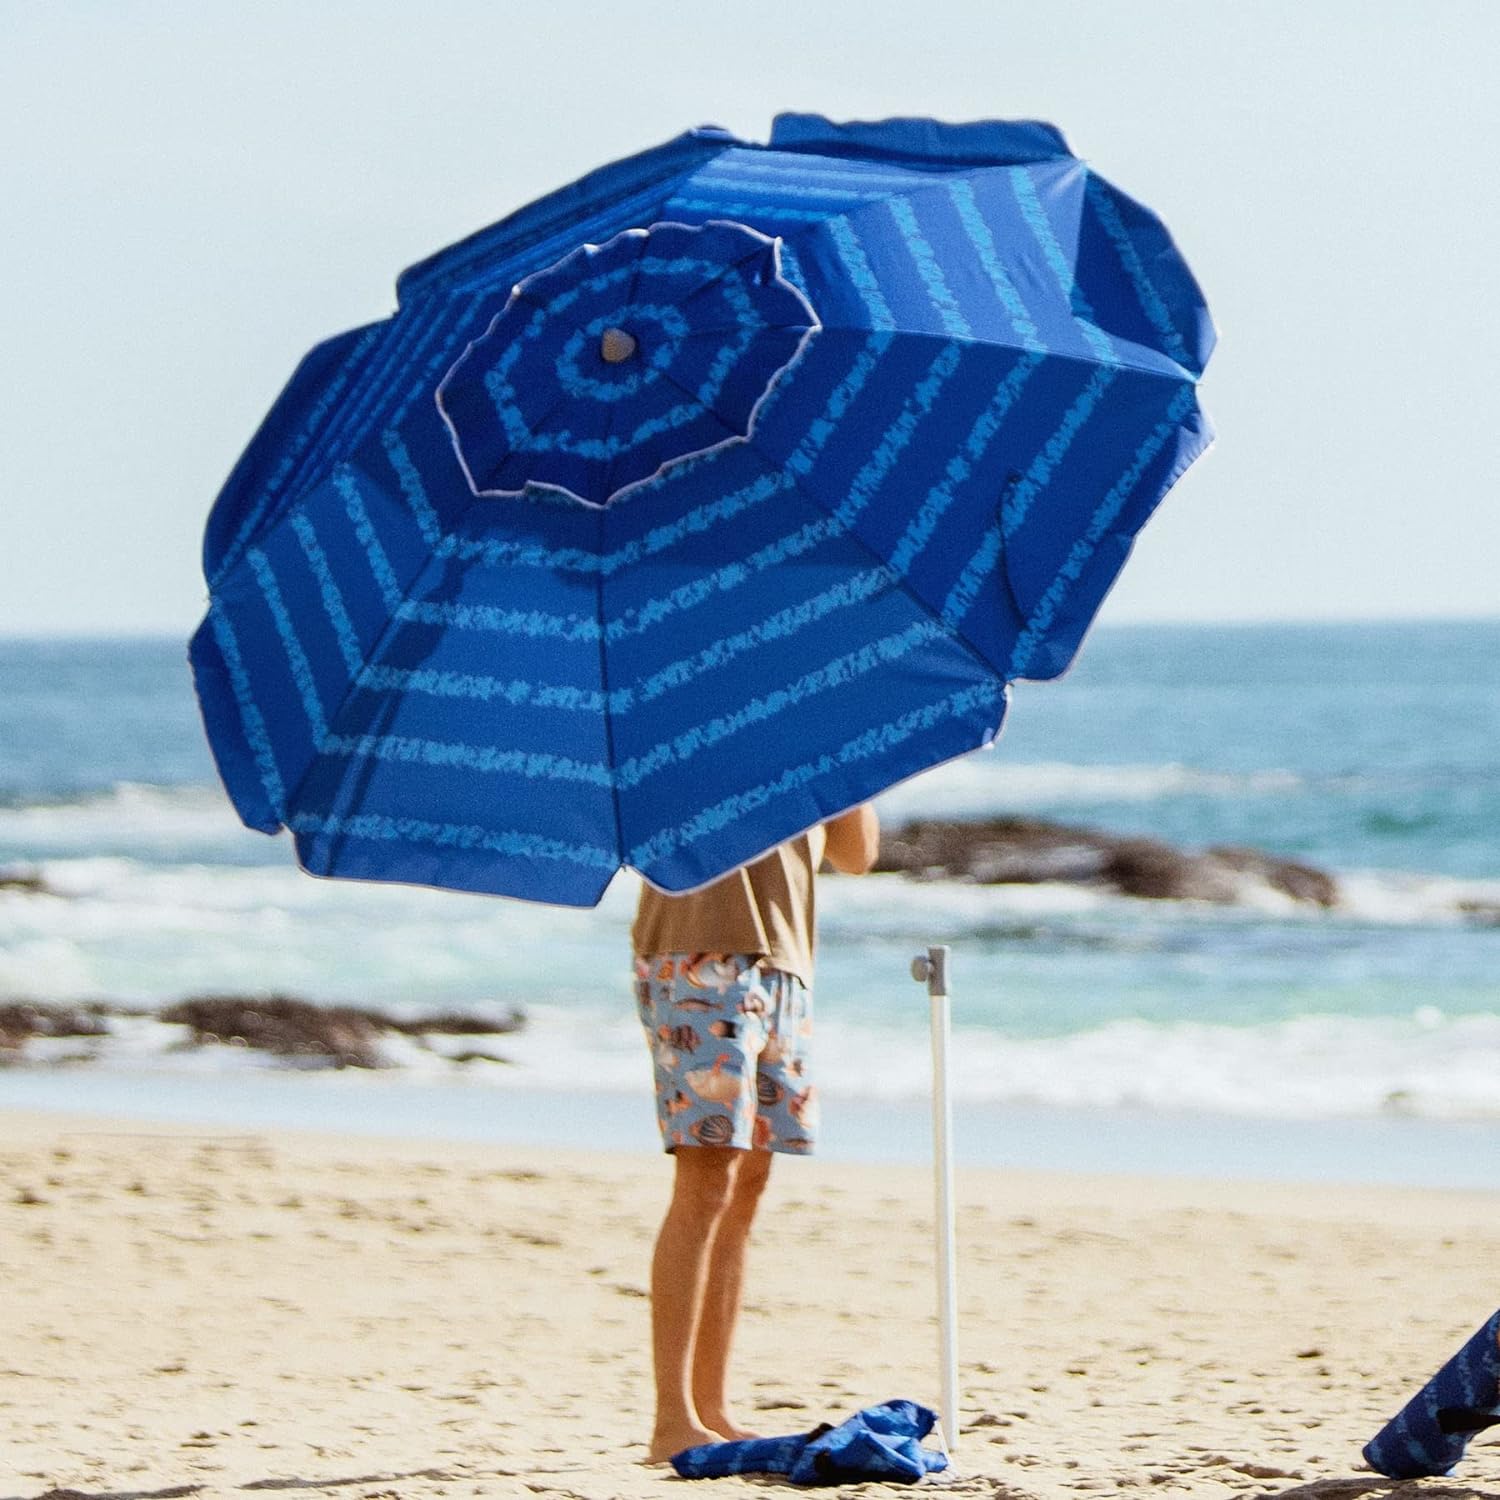 AMMSUN 6.5ft Outdoor Umbrella with sand anchor Blue Pattern